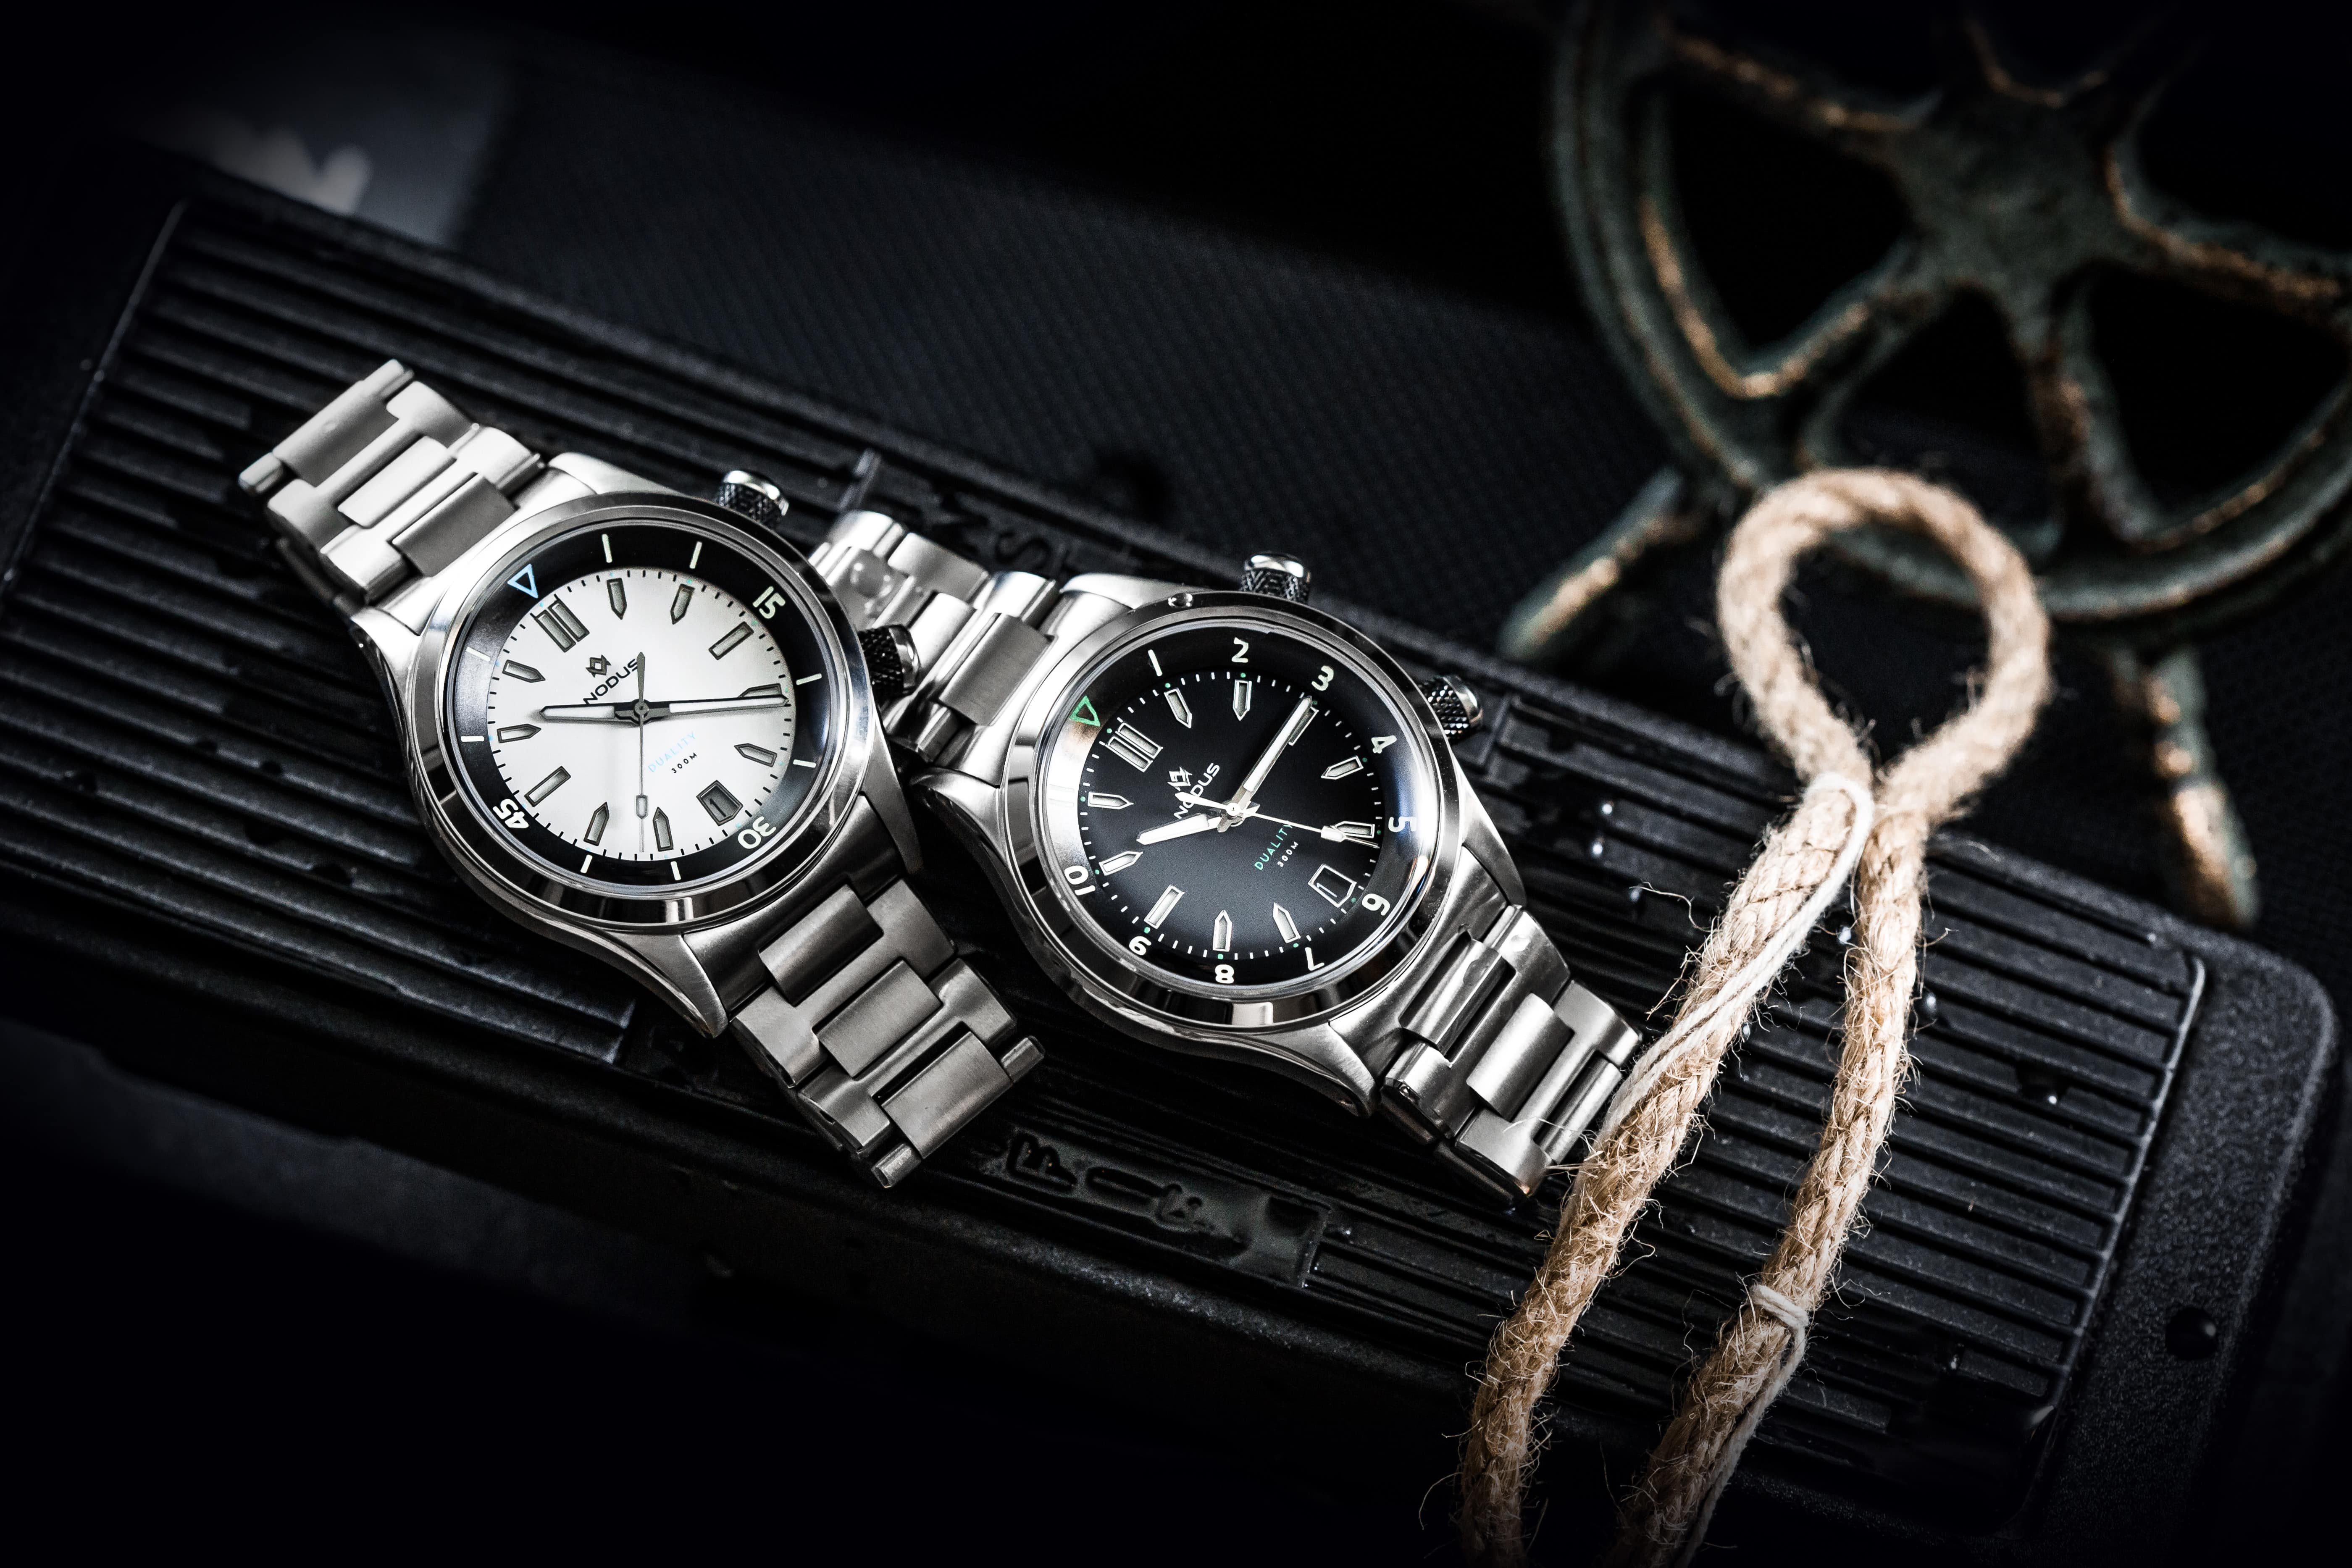 Introducing the Nodus Duality, a Vintage-Inspired Dual Crown Diver